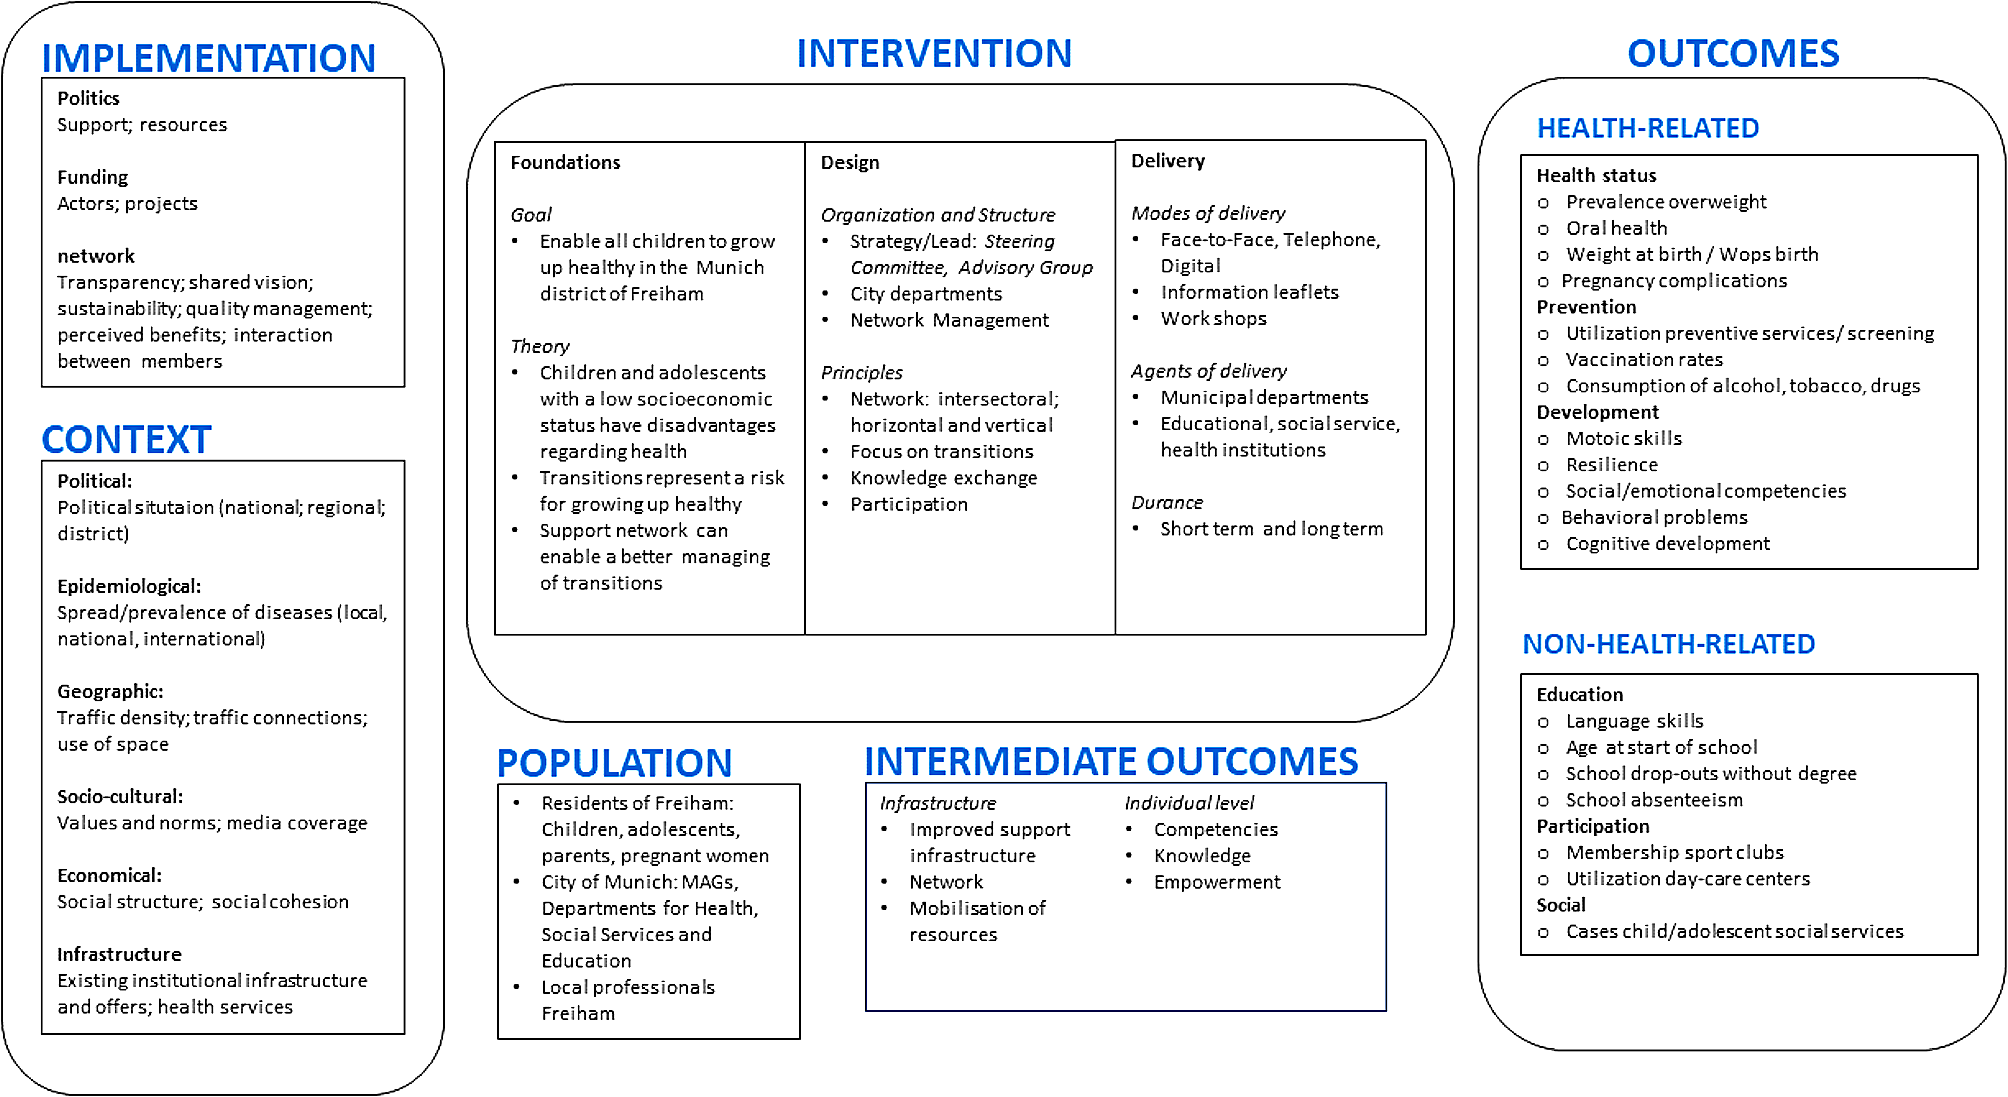 Process evaluation of an integrated community-based intervention for promoting health equity in children in a new residential development area